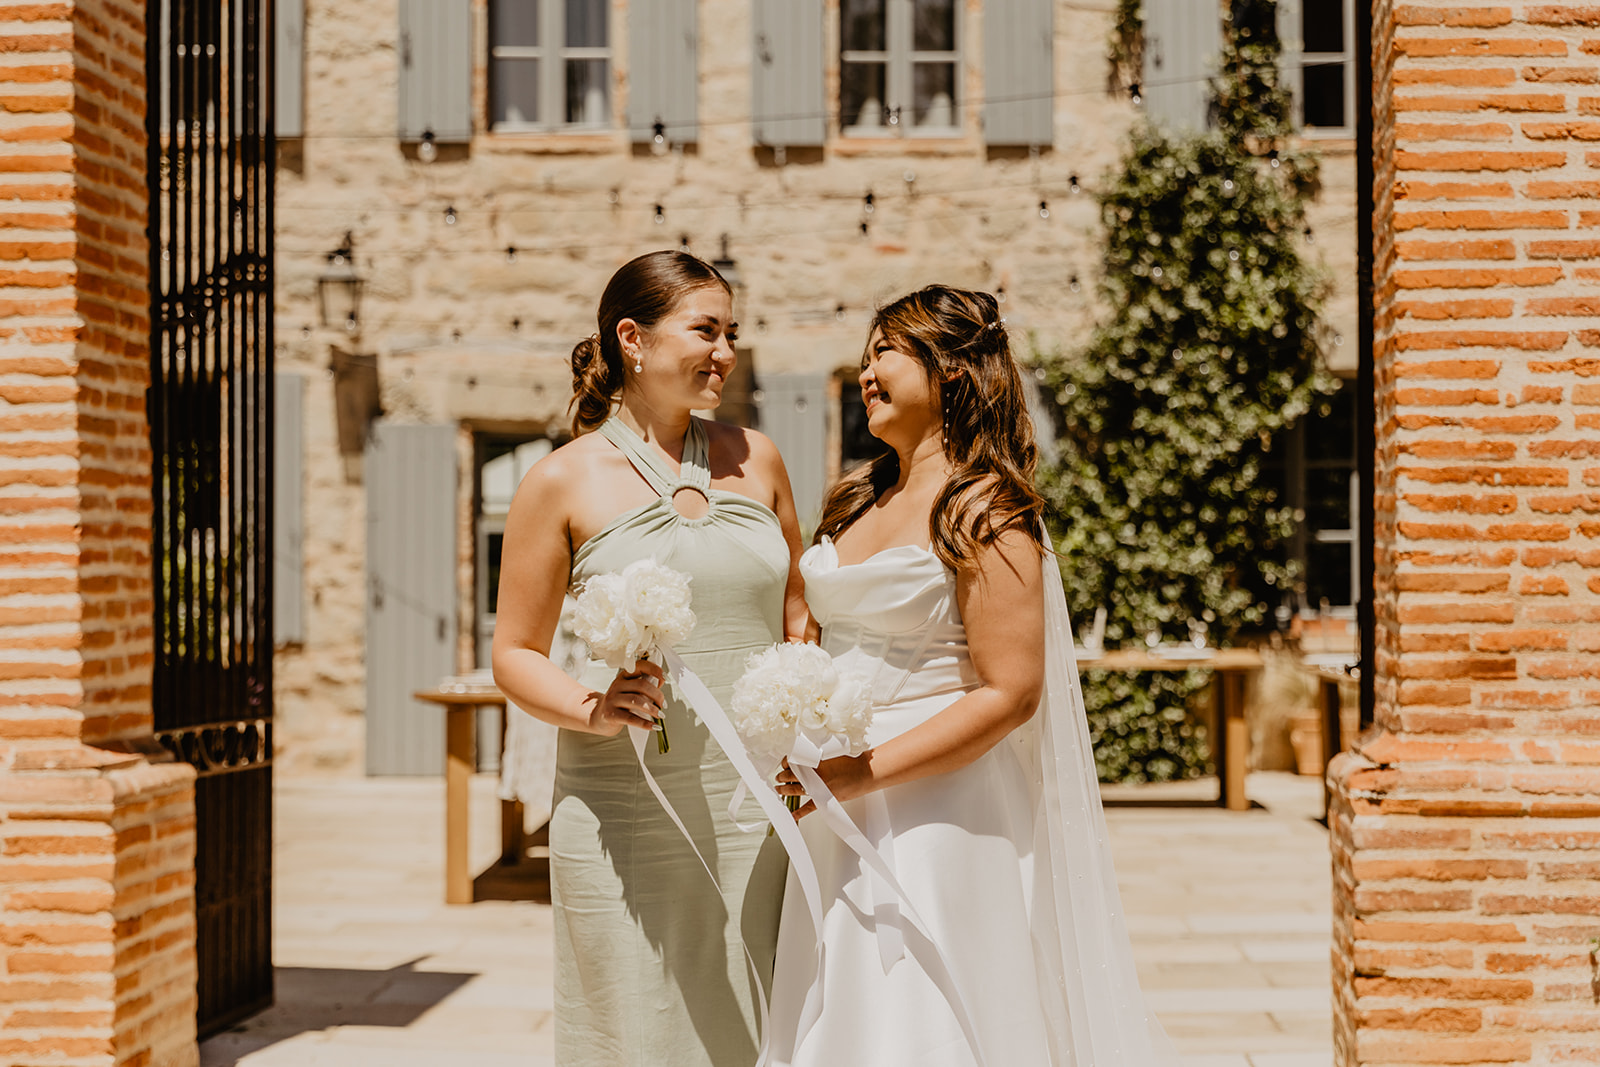 Bride and bridesmaid at a France Destination Wedding. Photography and Videography by Olive Joy Photography